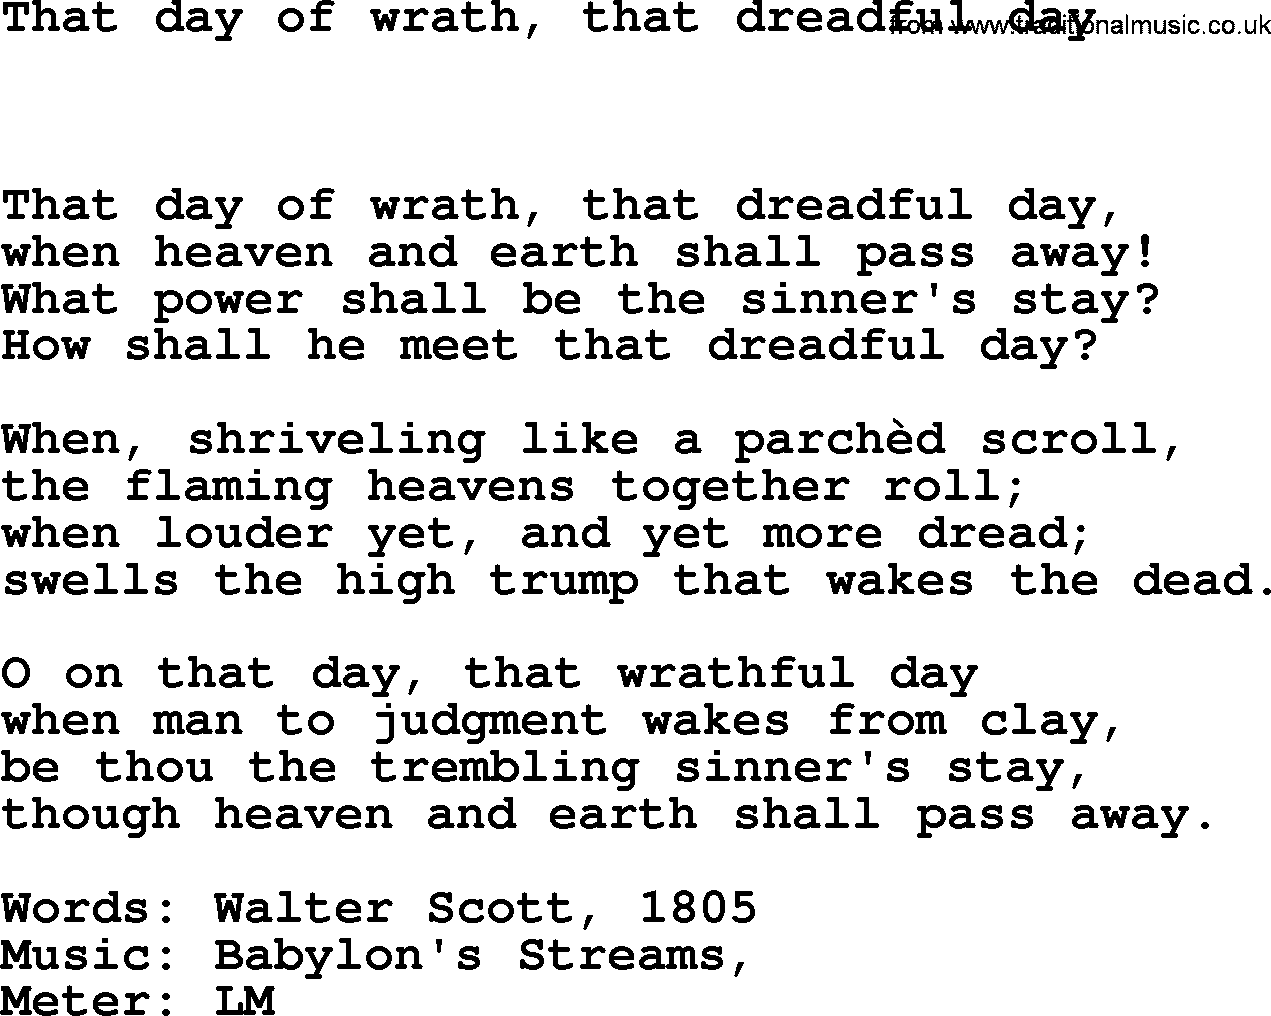 Book of Common Praise Hymn: That Day Of Wrath, That Dreadful Day.txt lyrics with midi music